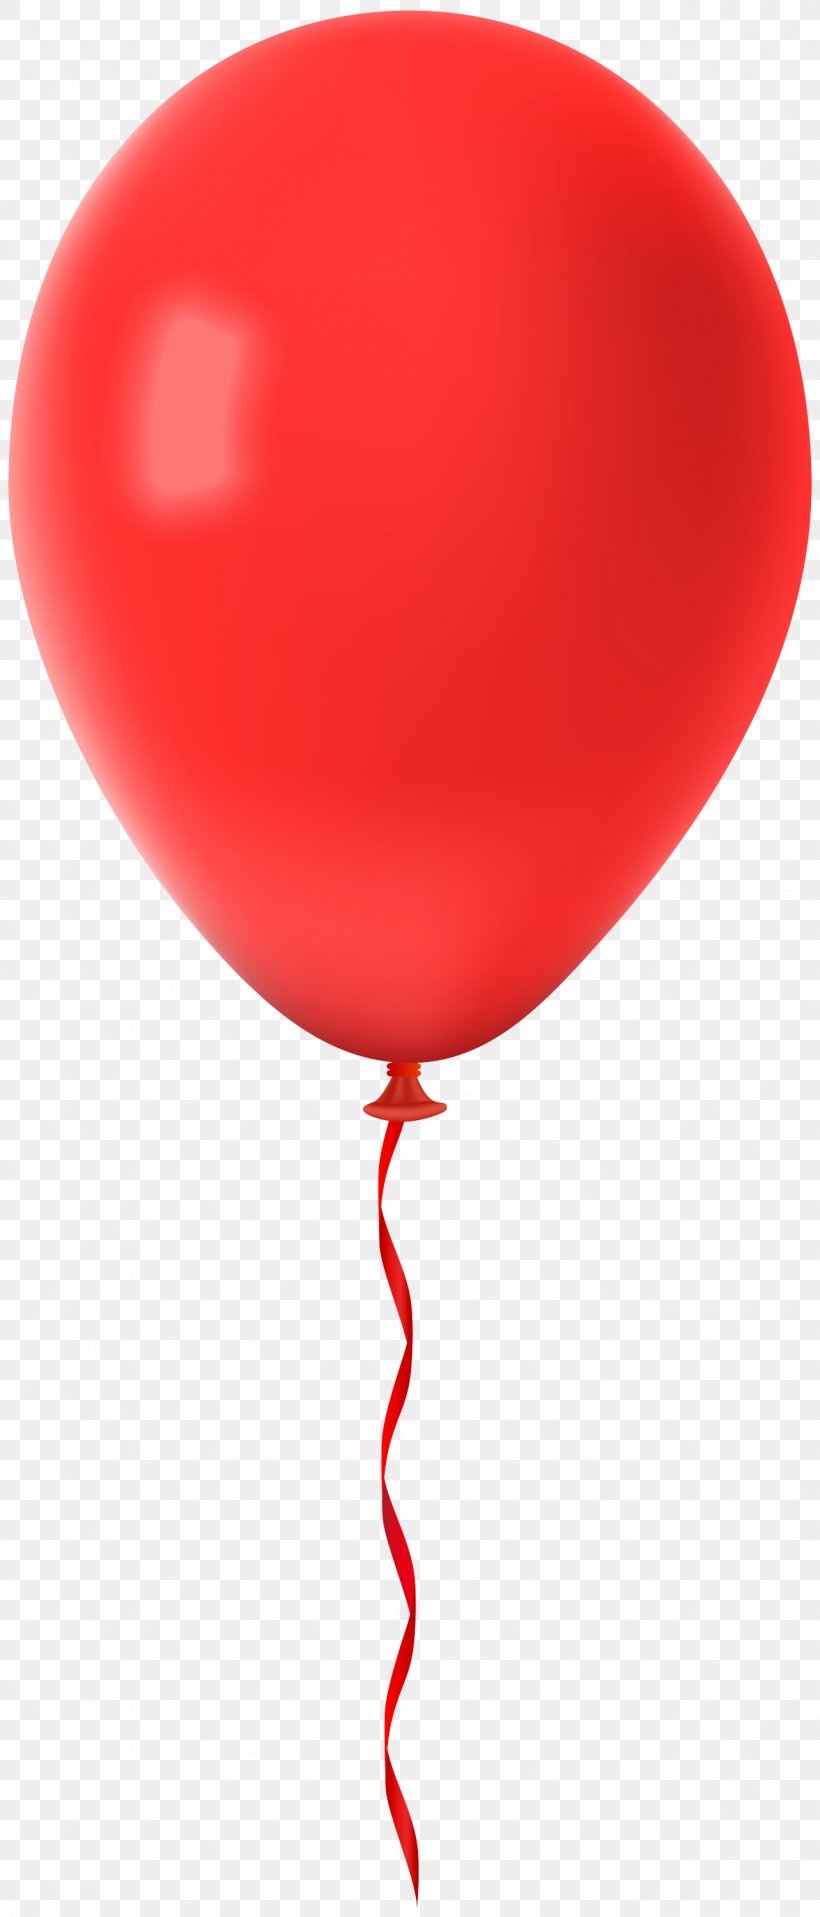 Balloon Red Heart Party Supply Clip Art, PNG, 1283x3000px, Balloon, Heart, Party Supply, Red, Toy Download Free